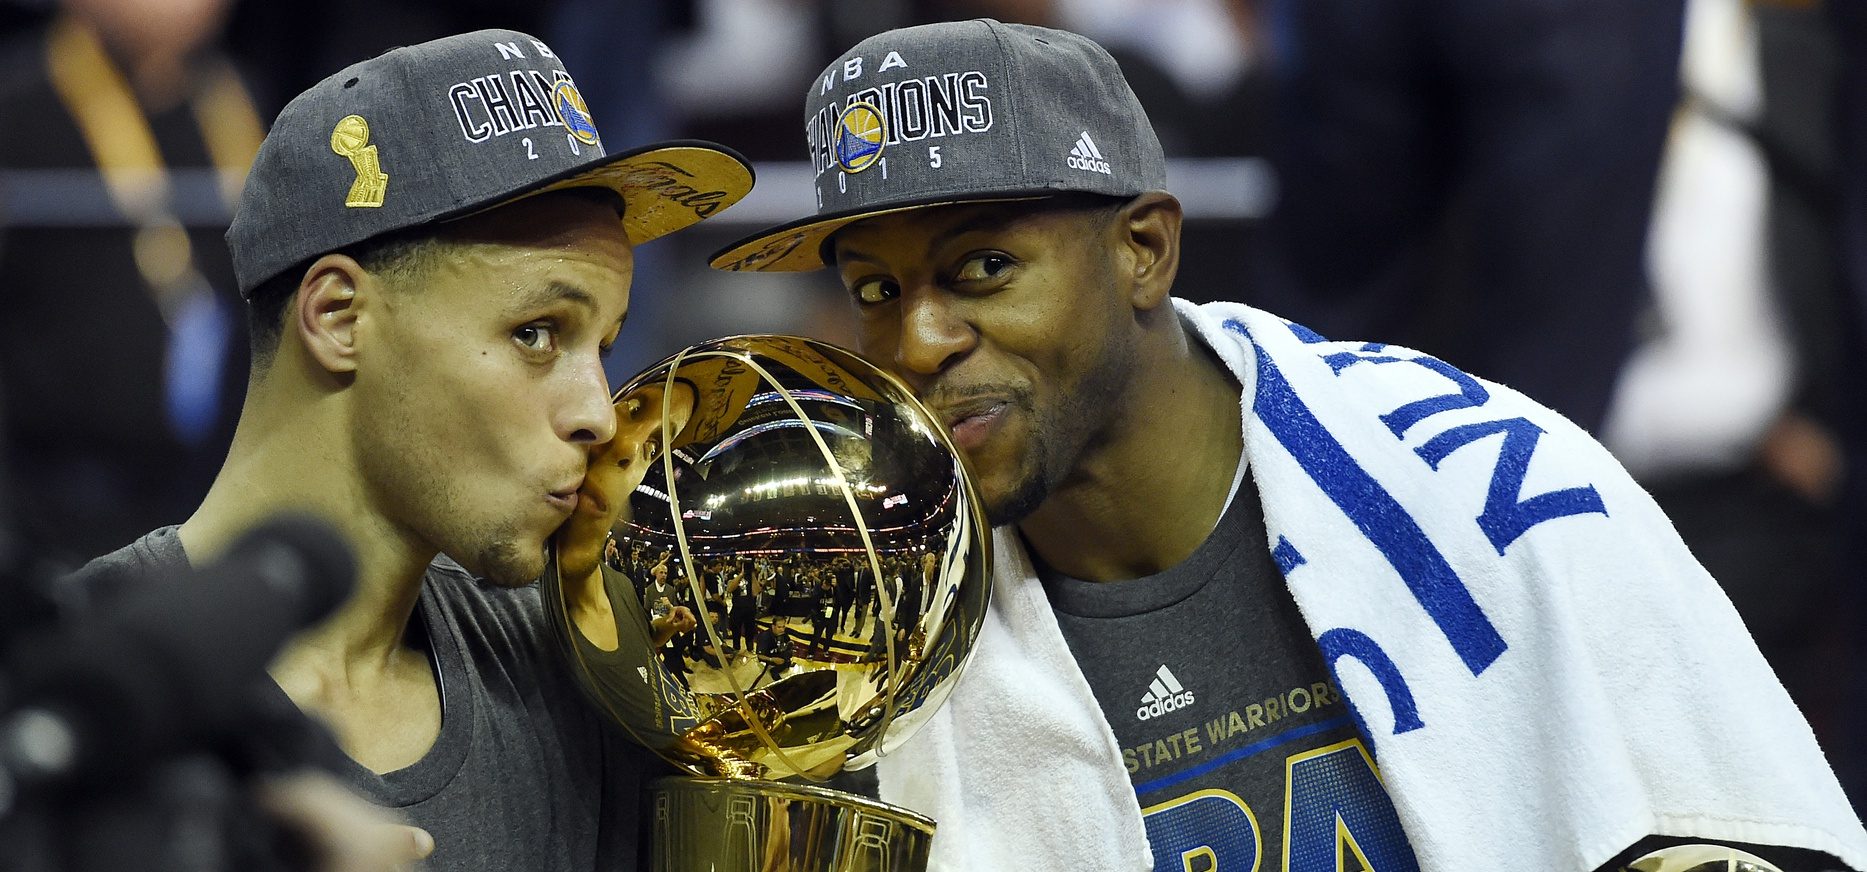 Jun 16, 2015; Cleveland, OH, USA; Golden State Warriors guard Stephen Curry (30) poses with the Larry O'Brien Trophy as Golden State Warriors guard Andre Iguodala (9) celebrates with the NBA Finals MVP trophy after beating the Cleveland Cavaliers in game six of the NBA Finals at Quicken Loans Arena. Mandatory Credit: Bob Donnan-USA TODAY Sports